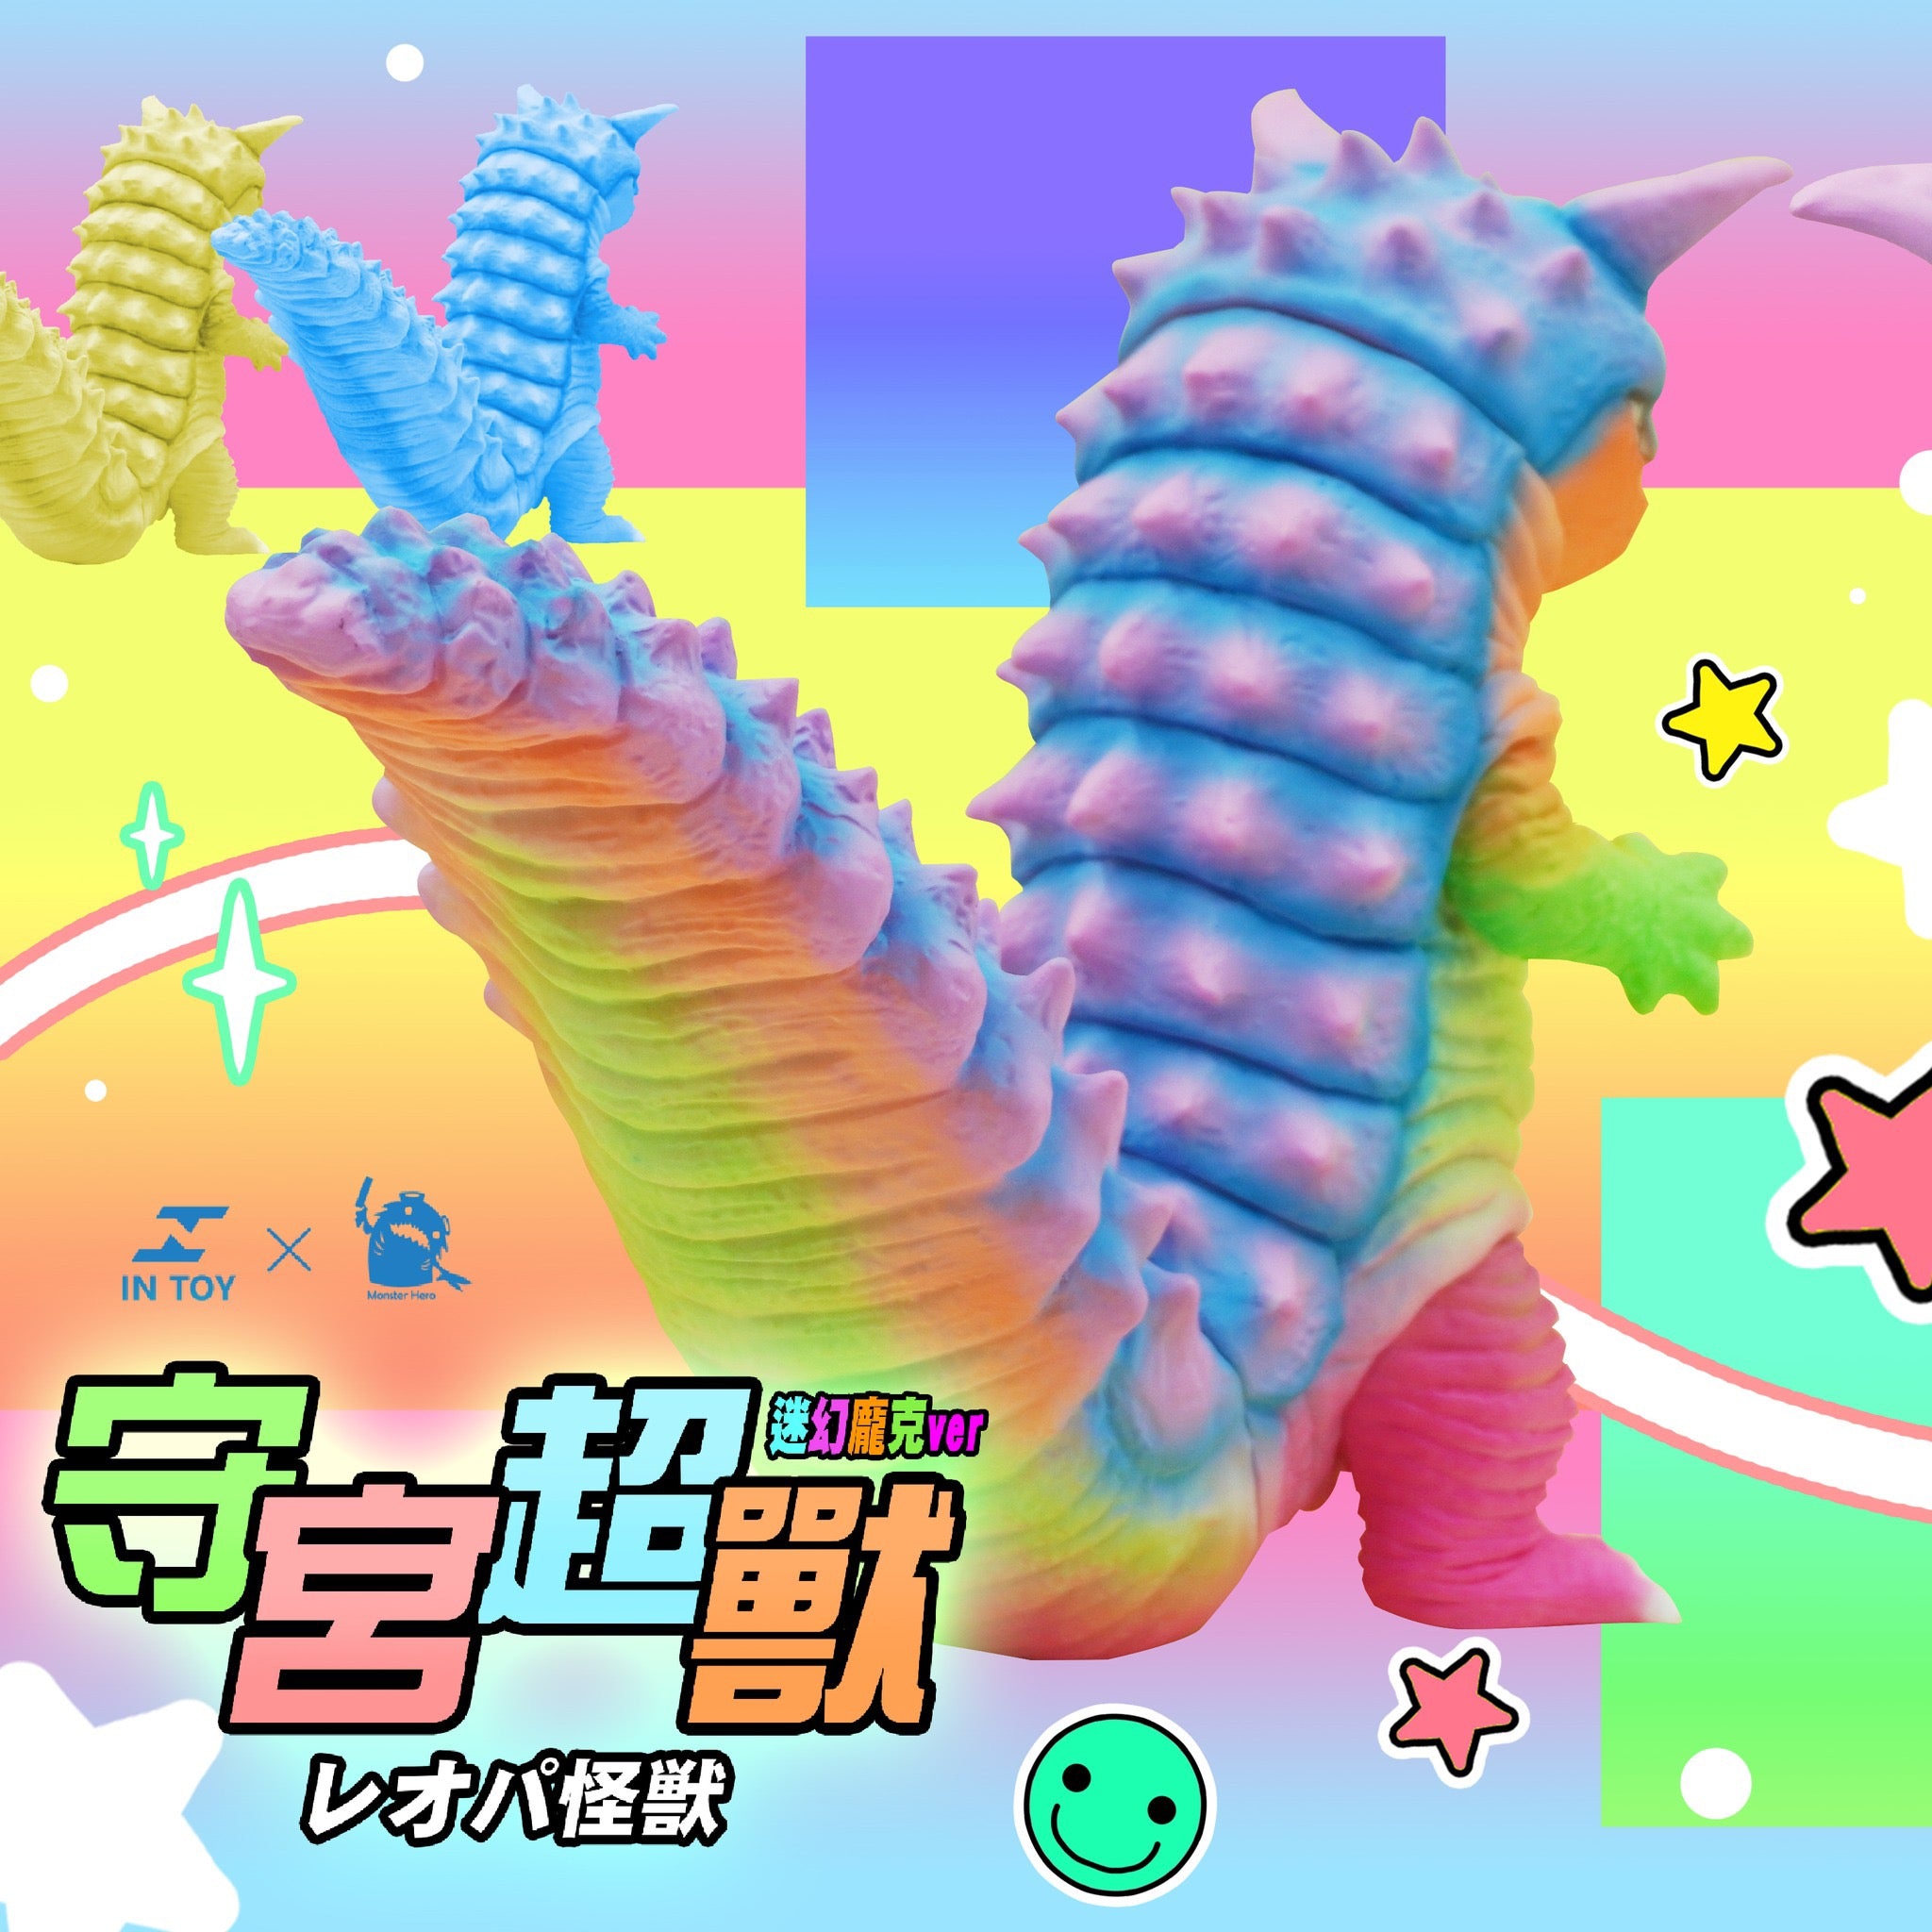 Gecko Super Beast -Psychedelic Punk .Ver by INTOY x Monster Hero